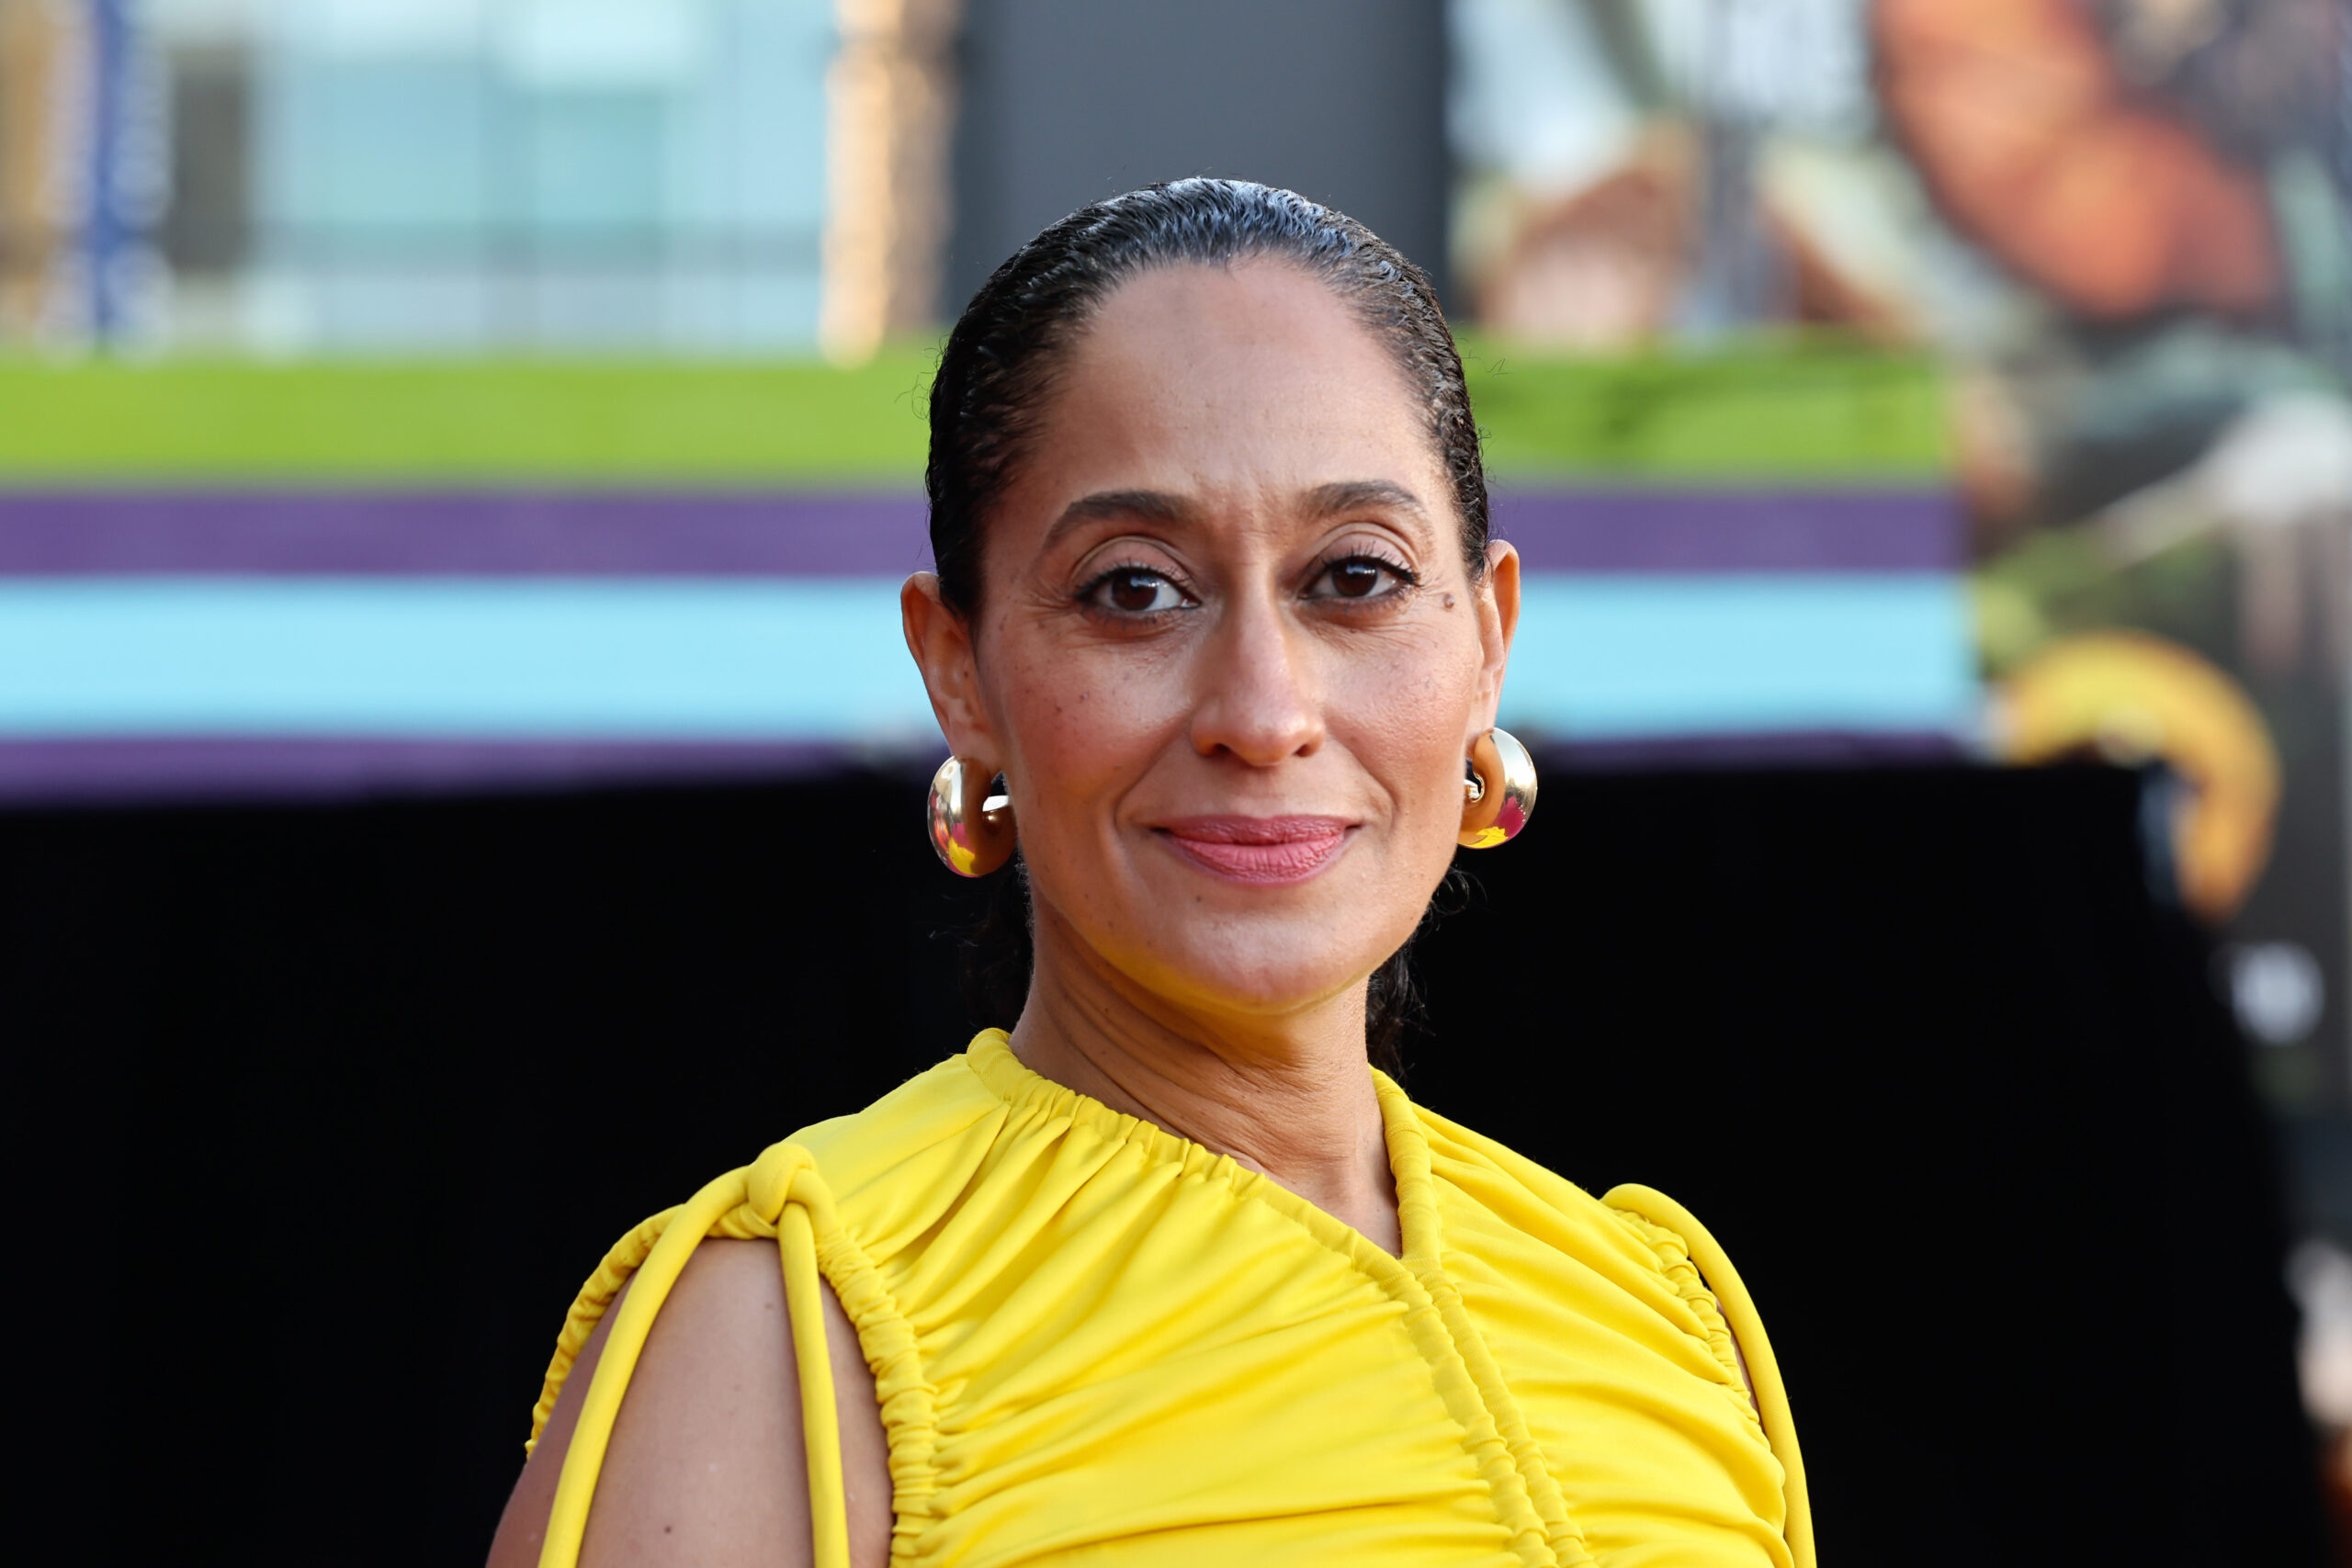 Tracee Ellis Ross Speaks on Having a Responsibility to Black Women Through Her Acting